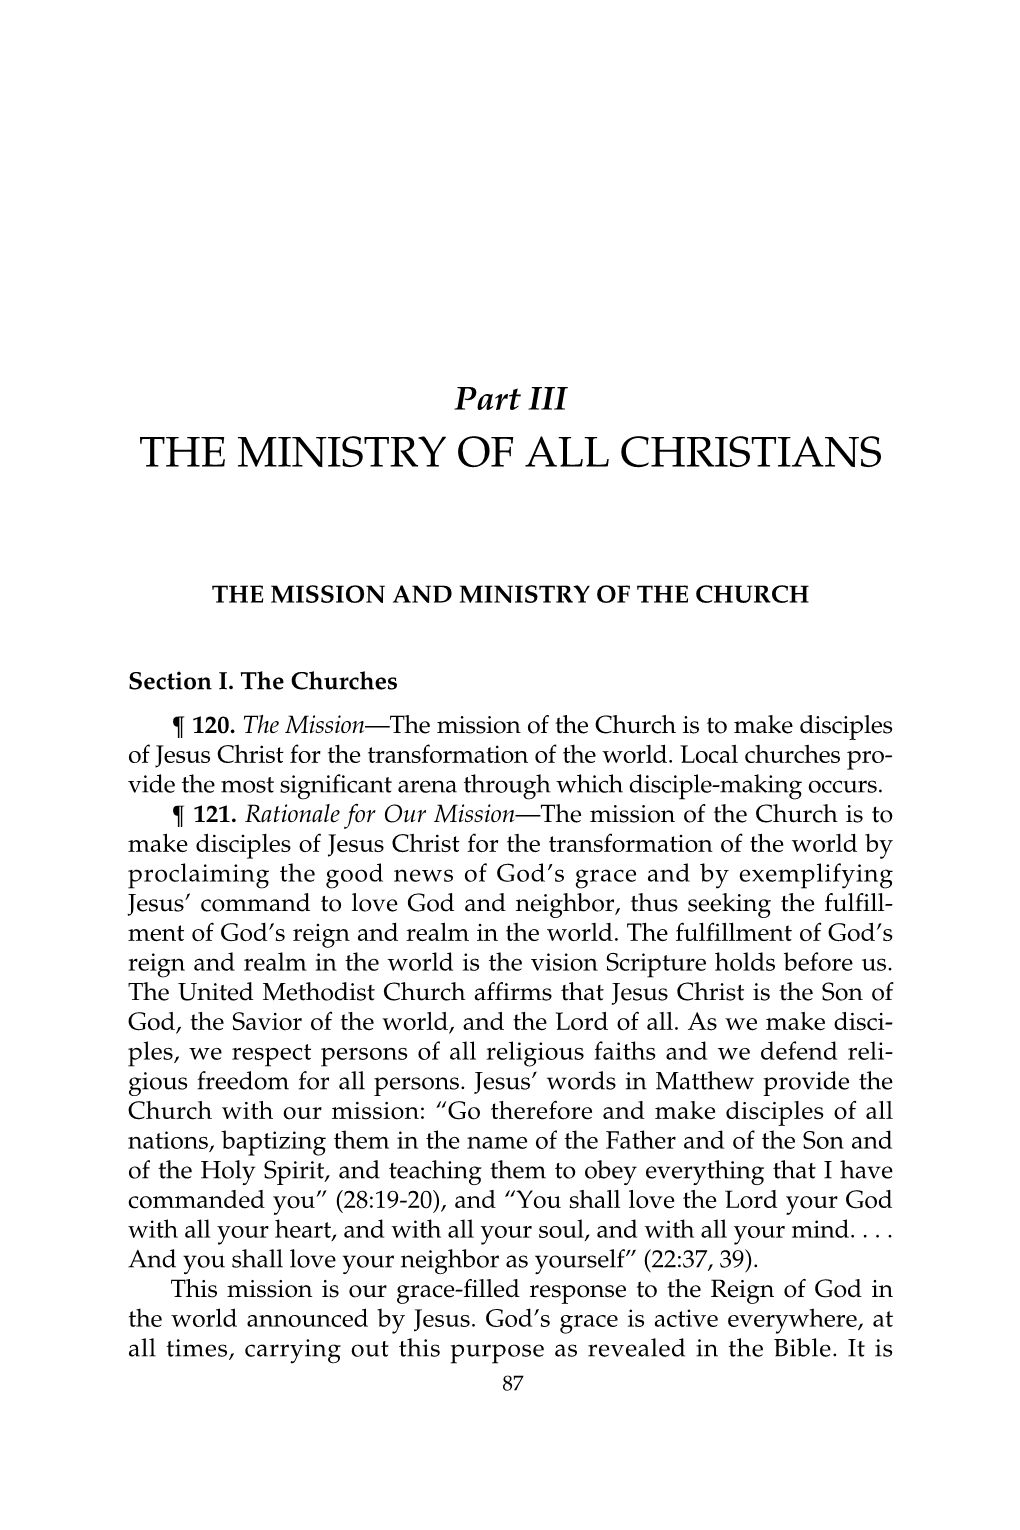 The Ministry of All Christians